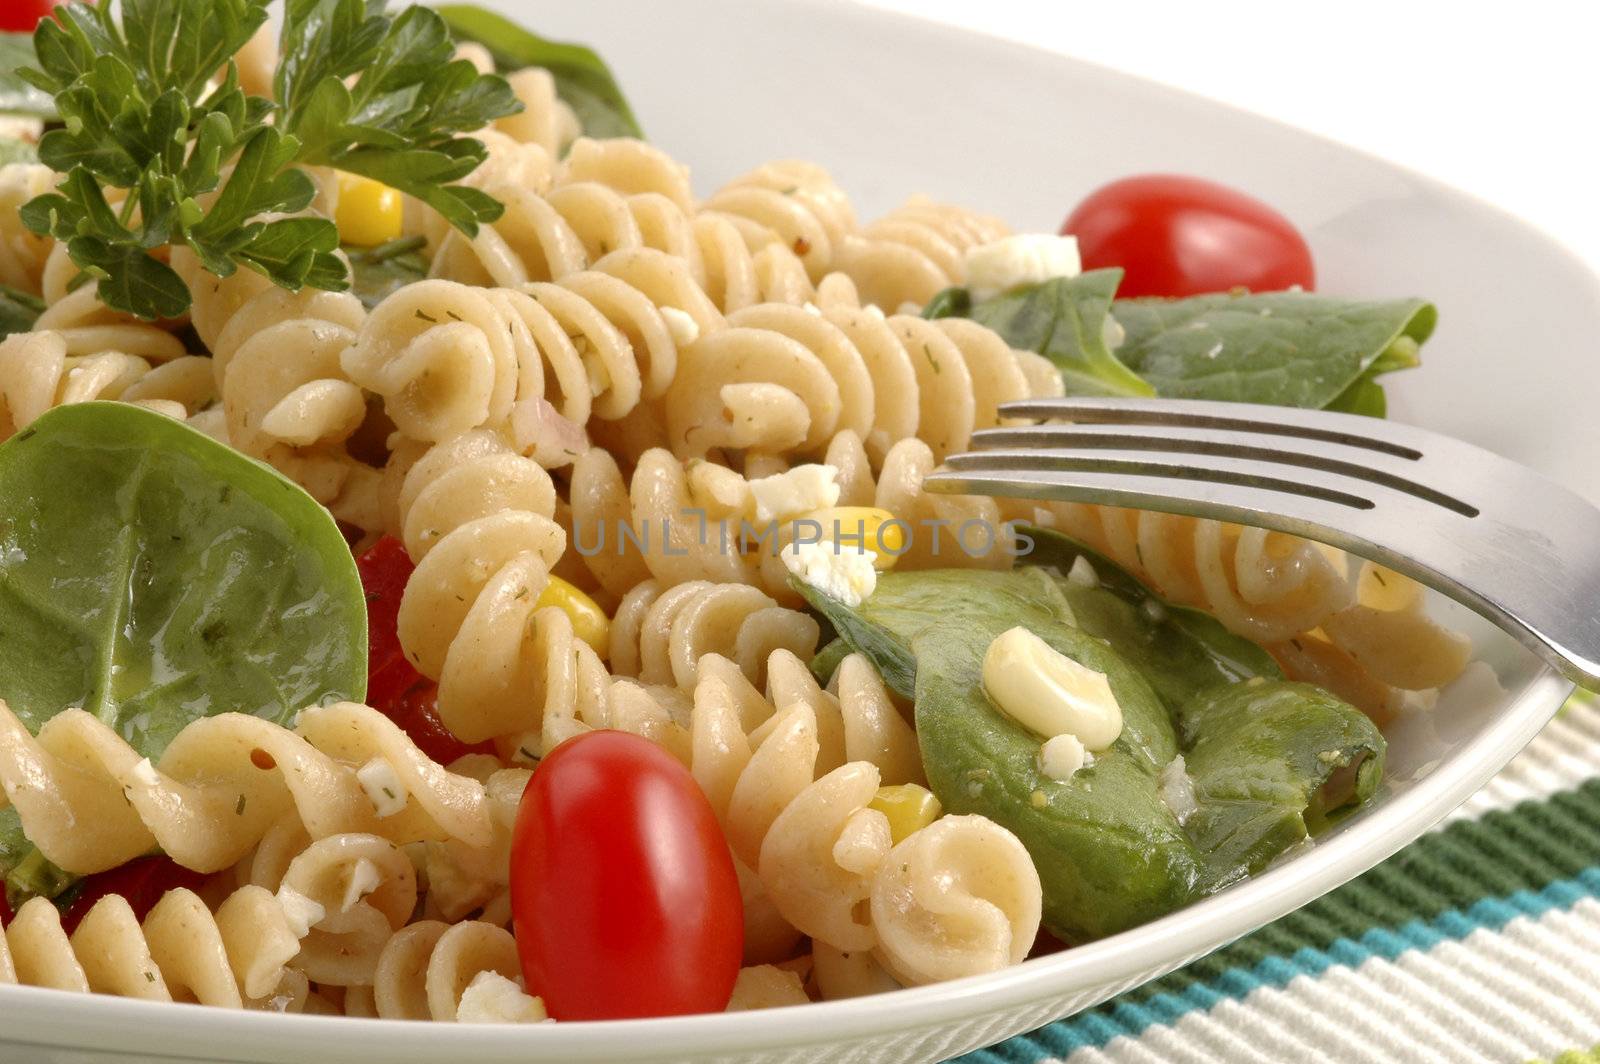 Pasta salad made with a variety of fresh garden vegetables.